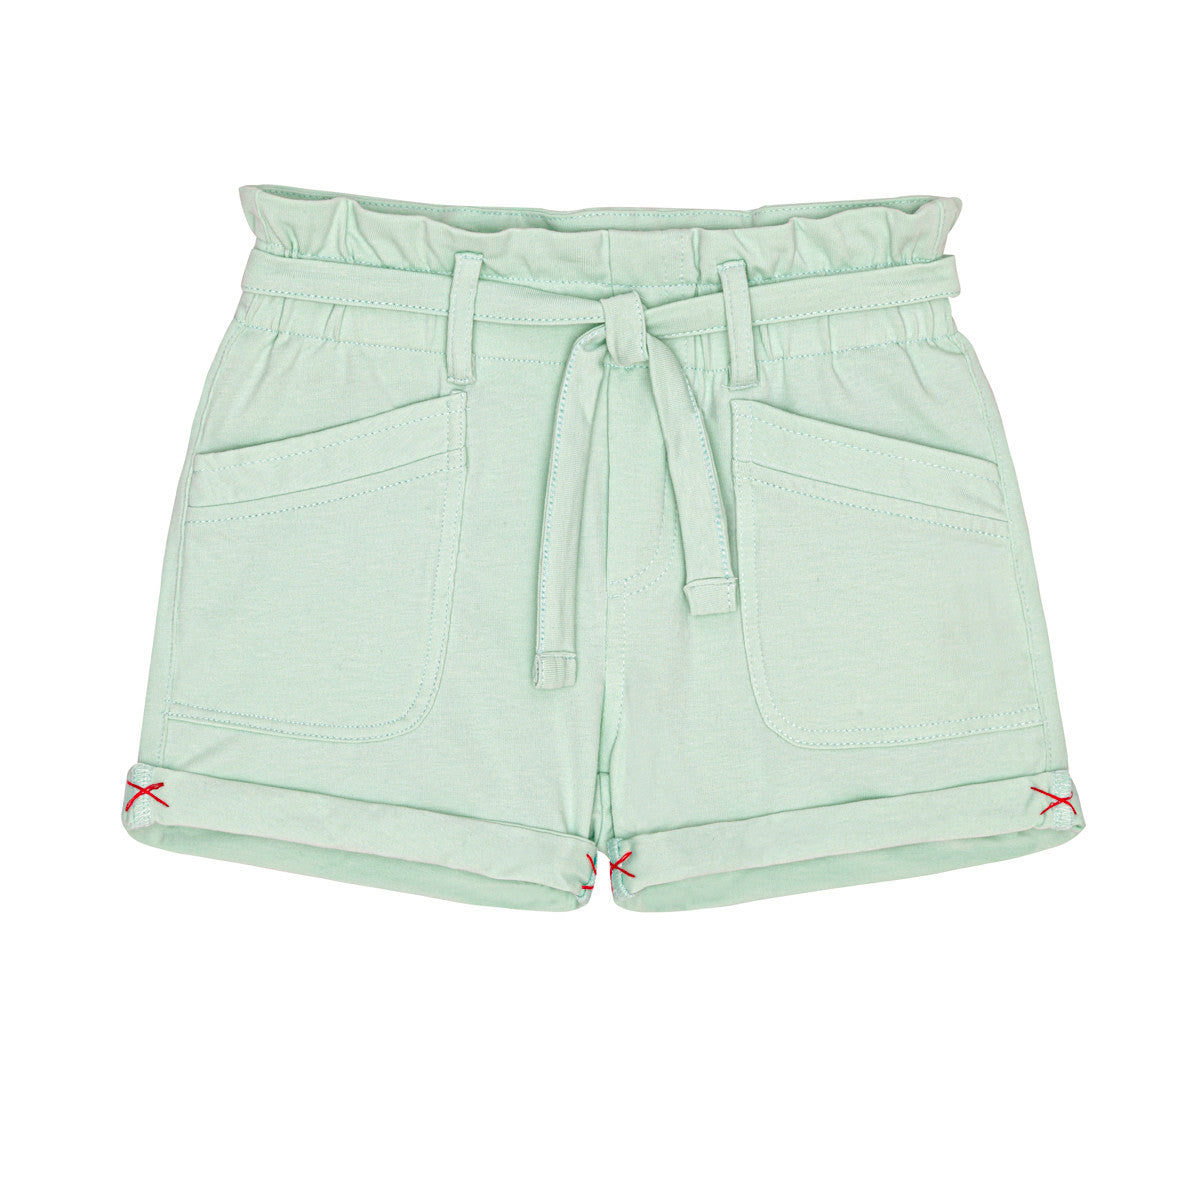 Little Hedonist shorts for girls in green. Kids clothing made from organic cotton. Sustainable, super soft and easy to wear!